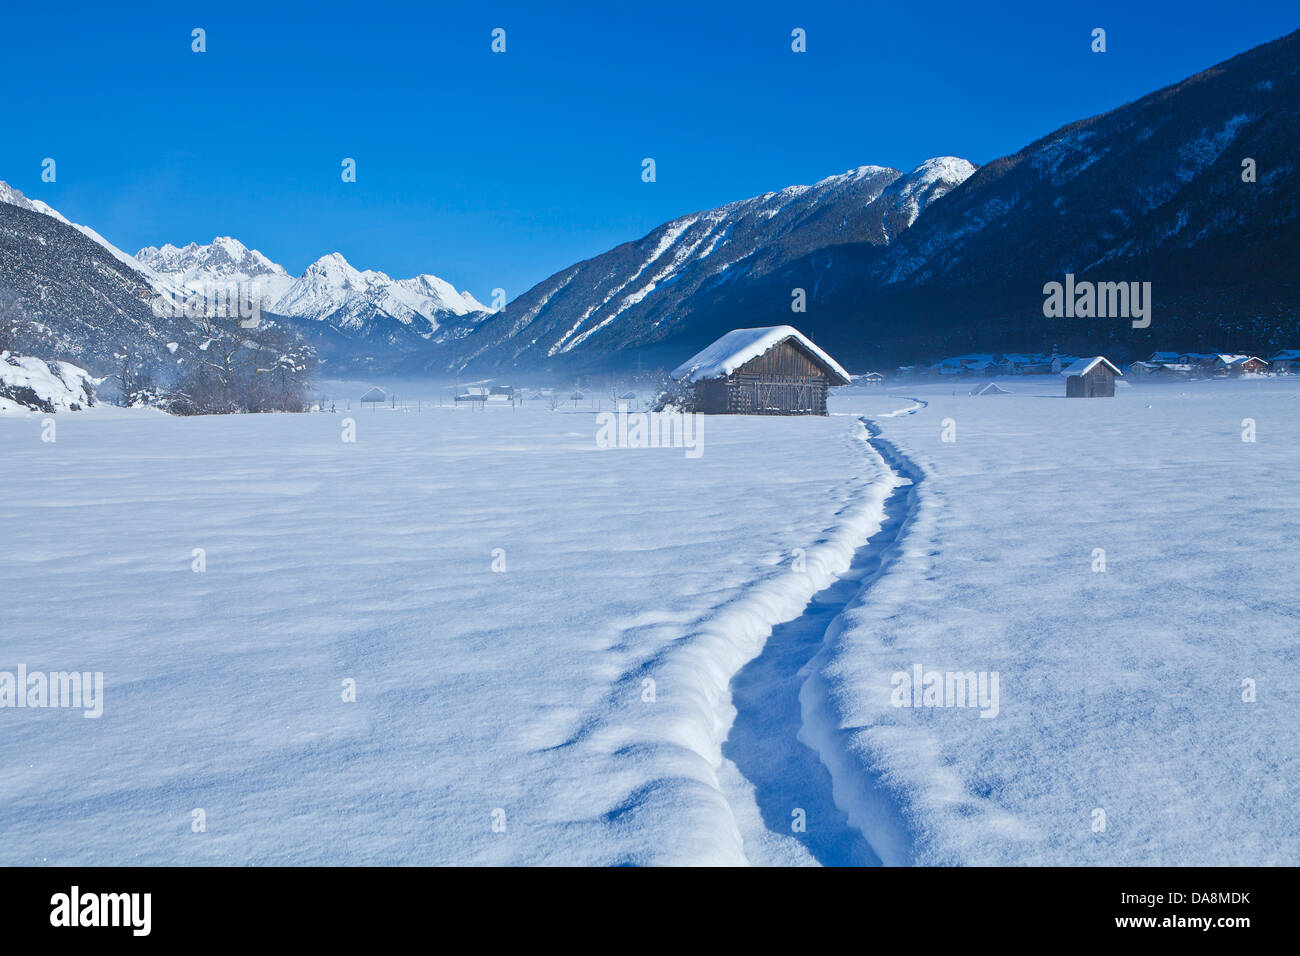 Austria, Europe, Tyrol, Gurgltal, Tarrenz, Imst, winter, Stadel, track, trace, Road-pure, snow, mountains, sky, wood, forest, bl Stock Photo